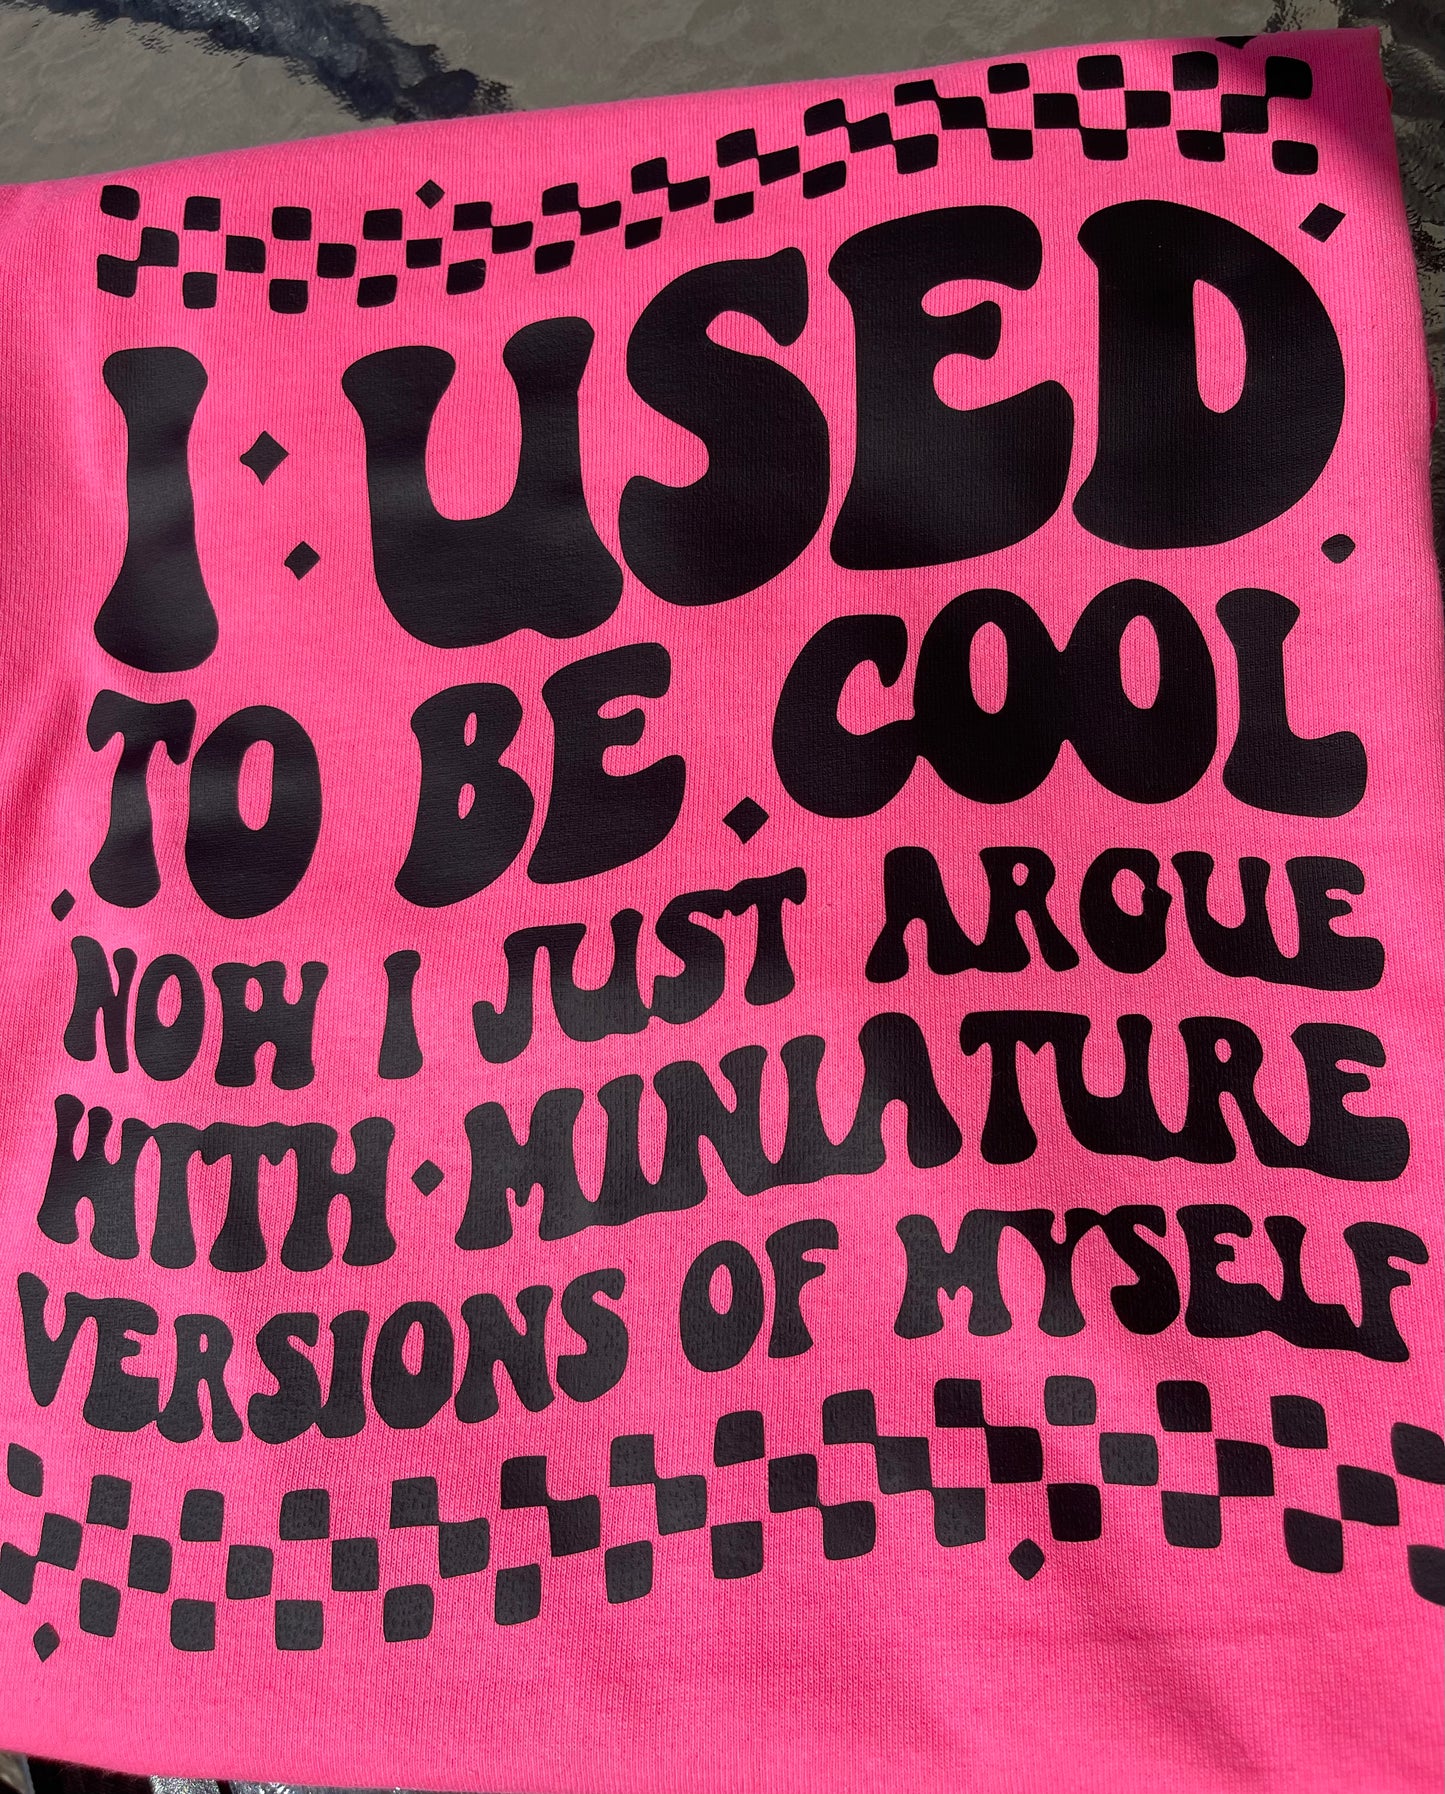 I used to be cool now I agree with miniature versions of myself tee